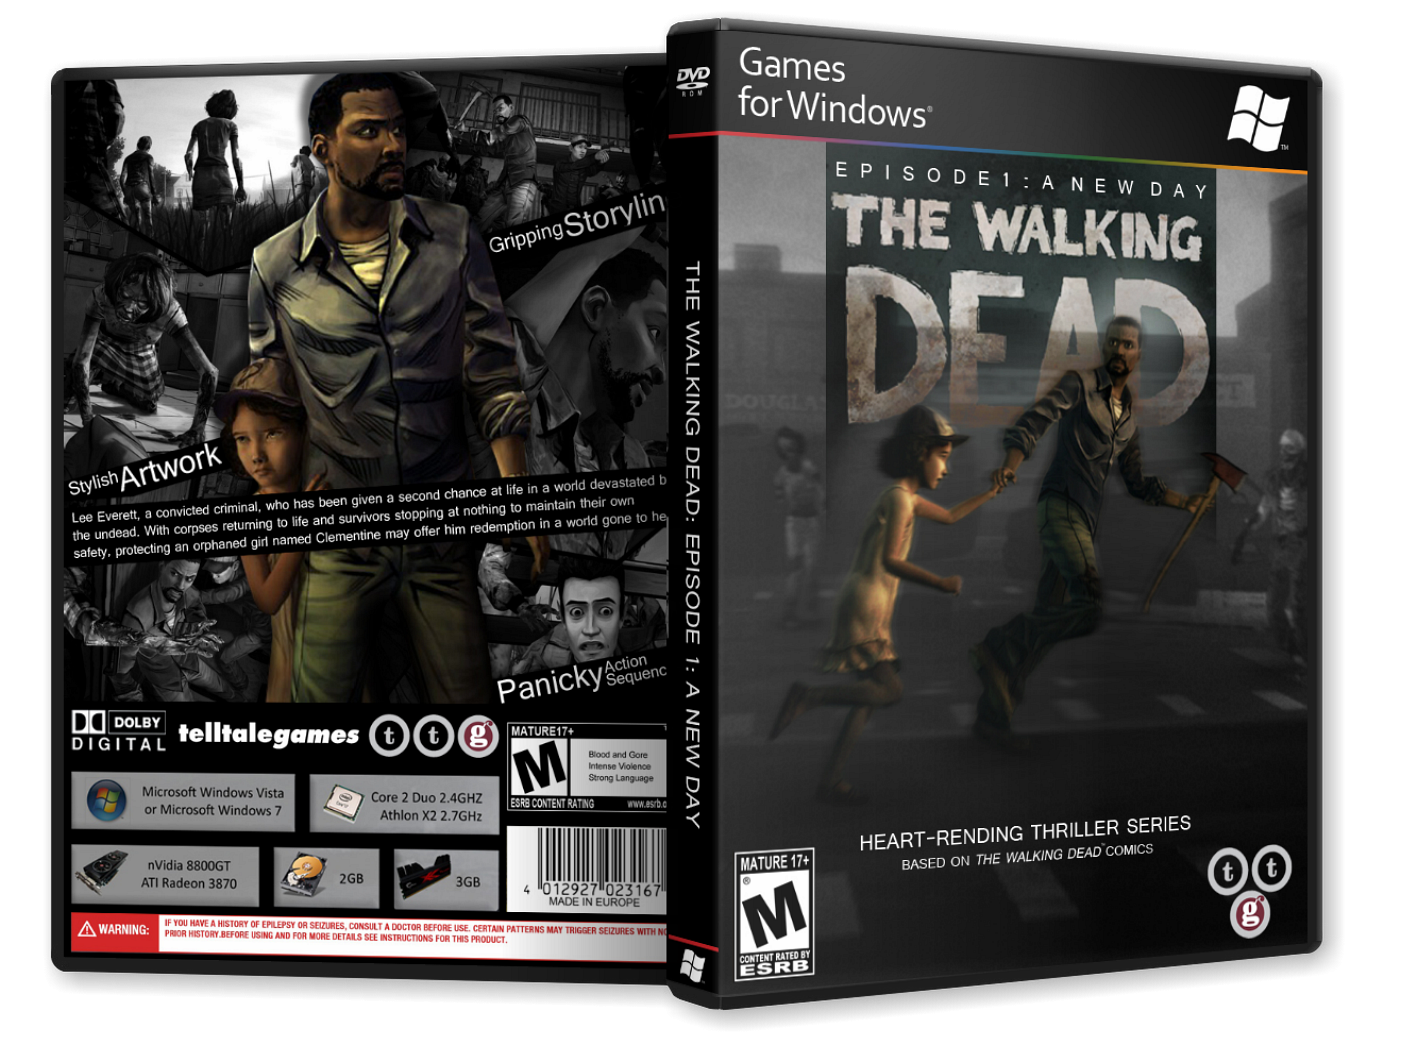 The Walking Dead: Episode 1: A New Day box cover